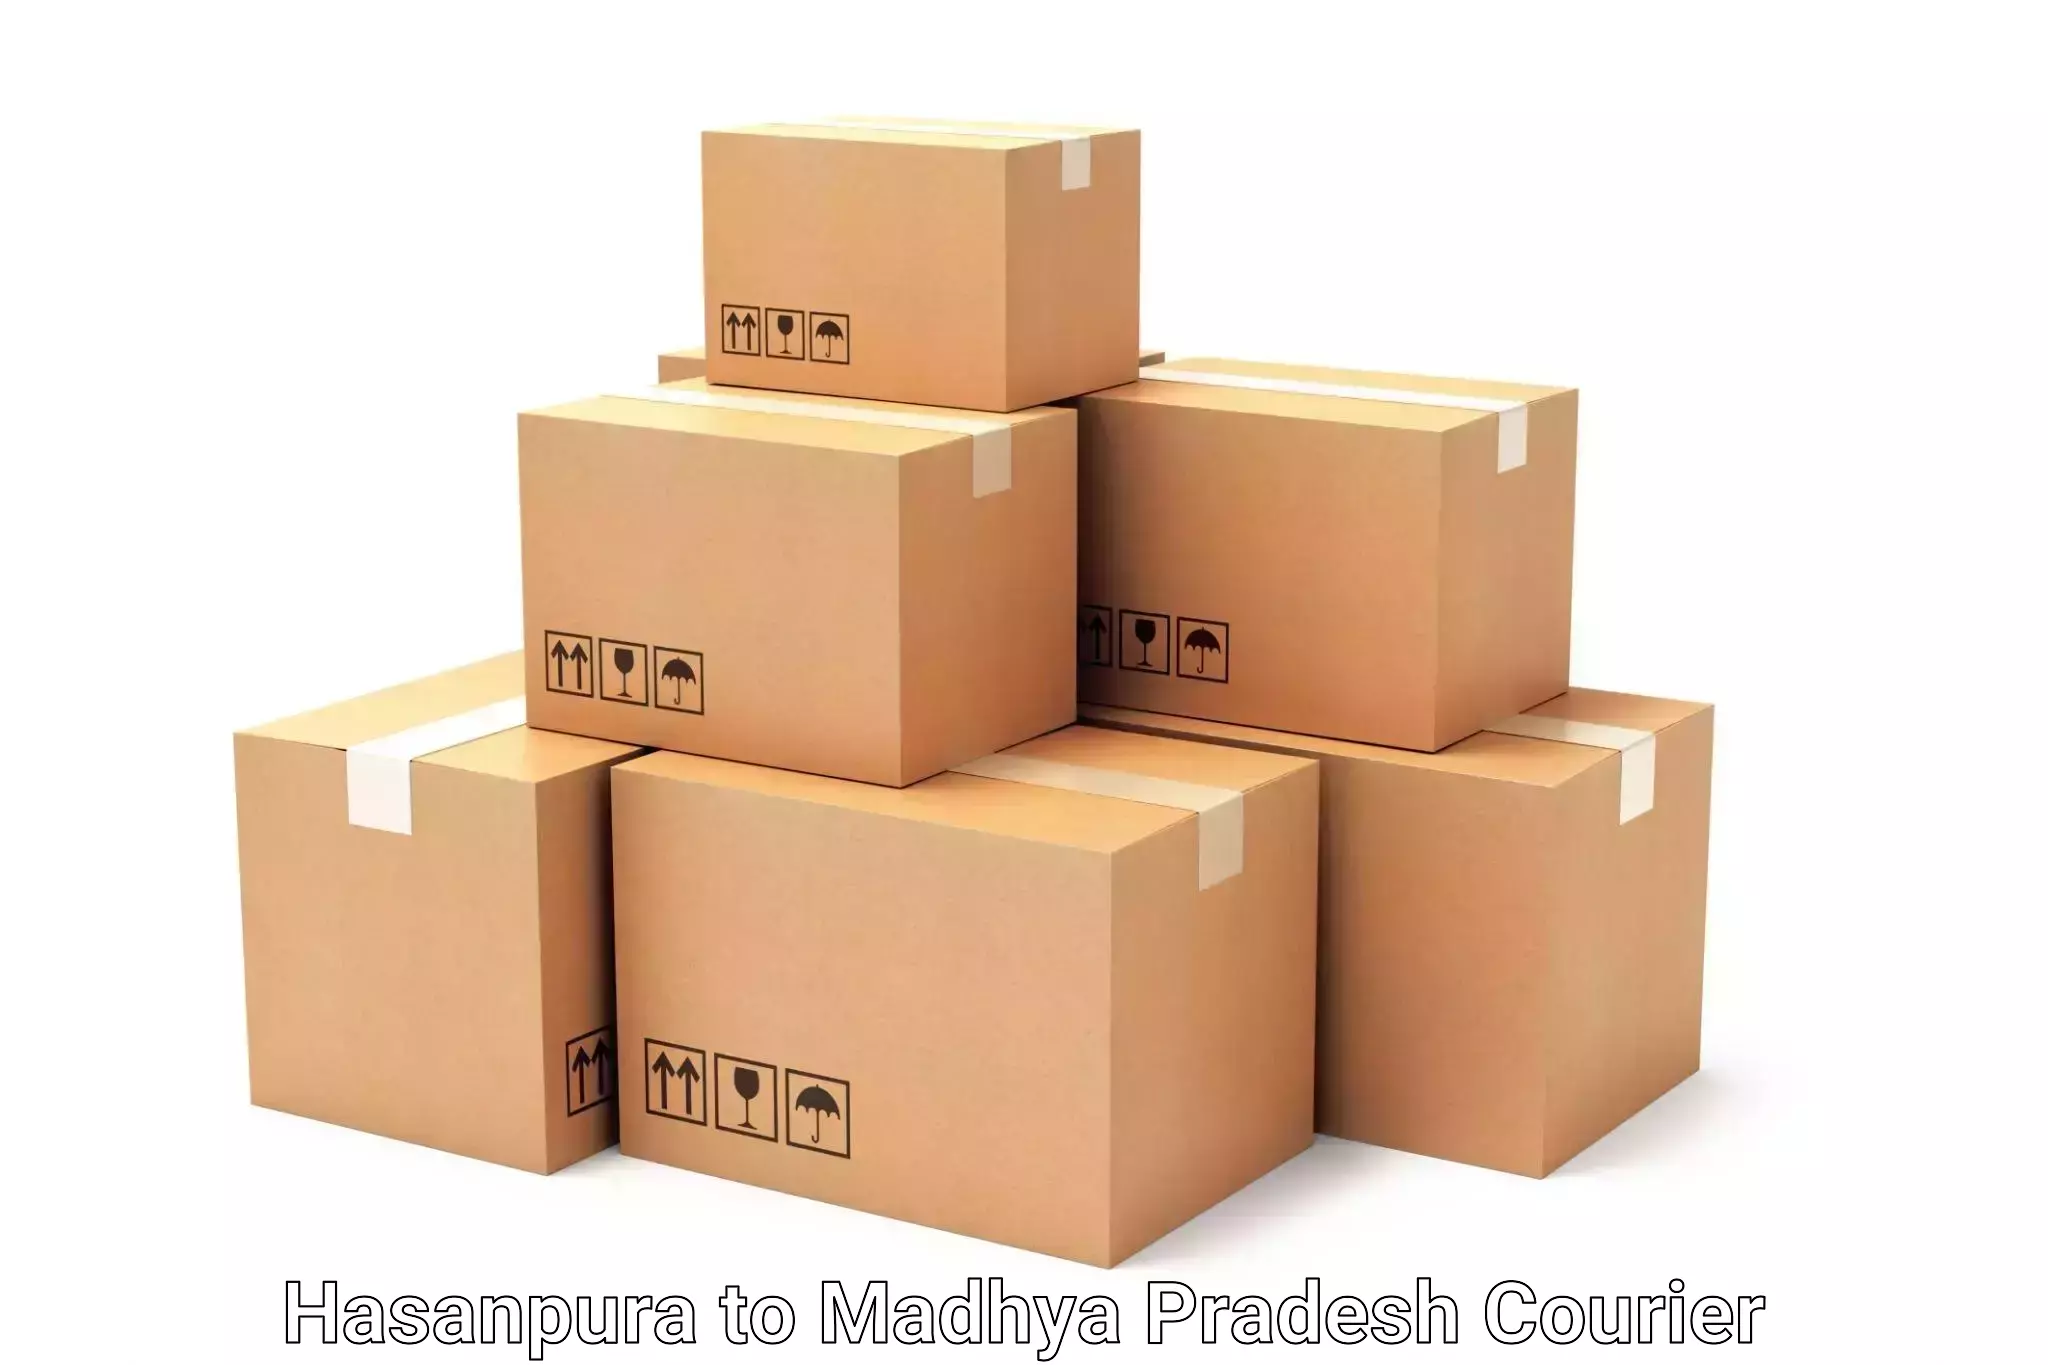 Luggage storage and delivery in Hasanpura to Madhya Pradesh